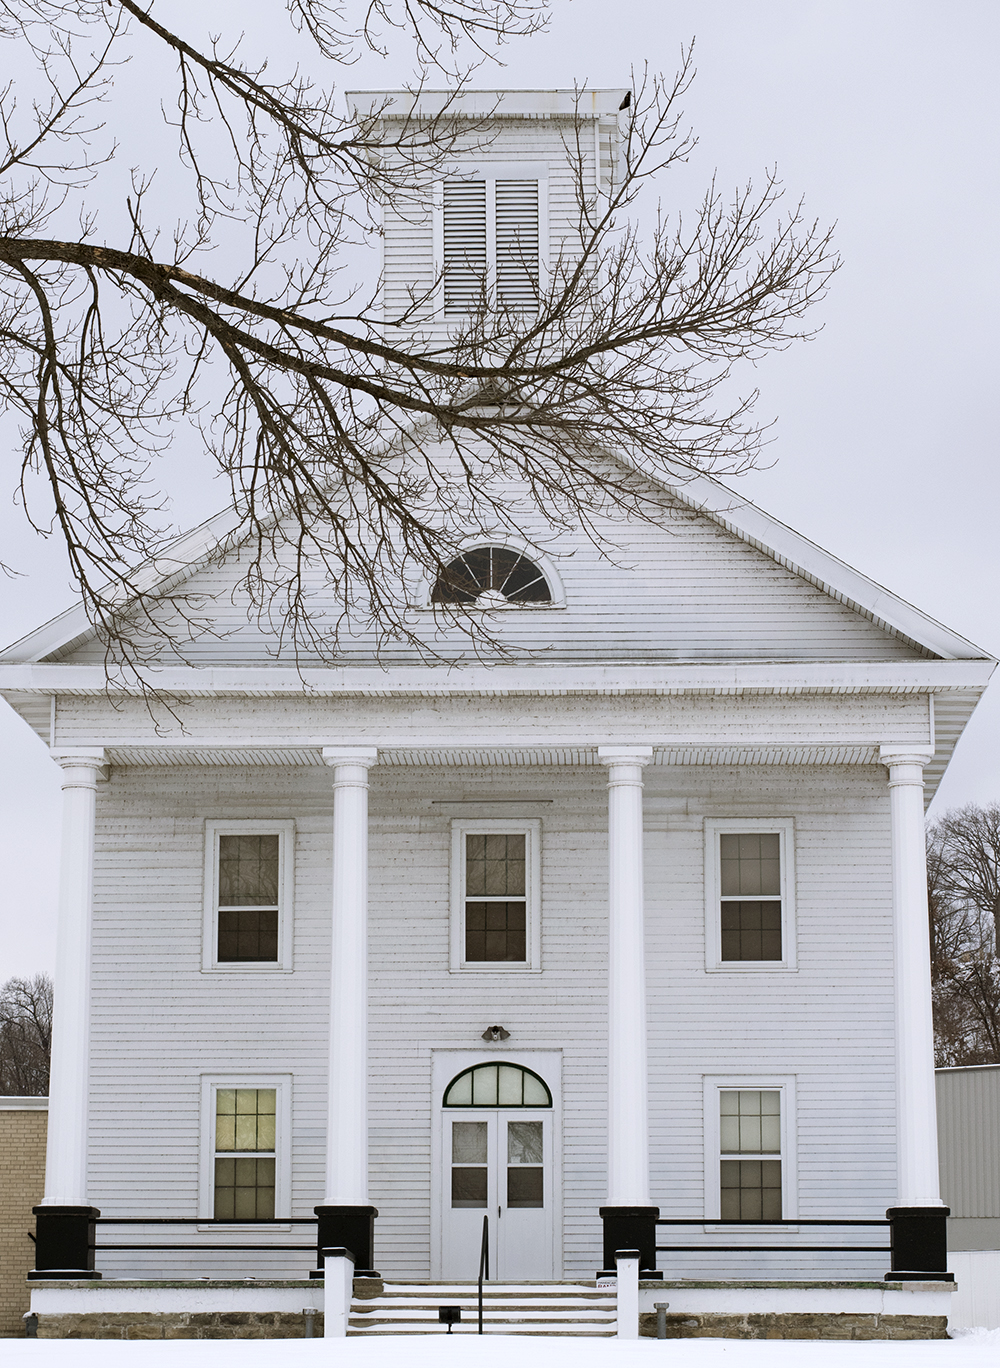 The Old Pepin County Courthouse was built in 1874 and contains the museum